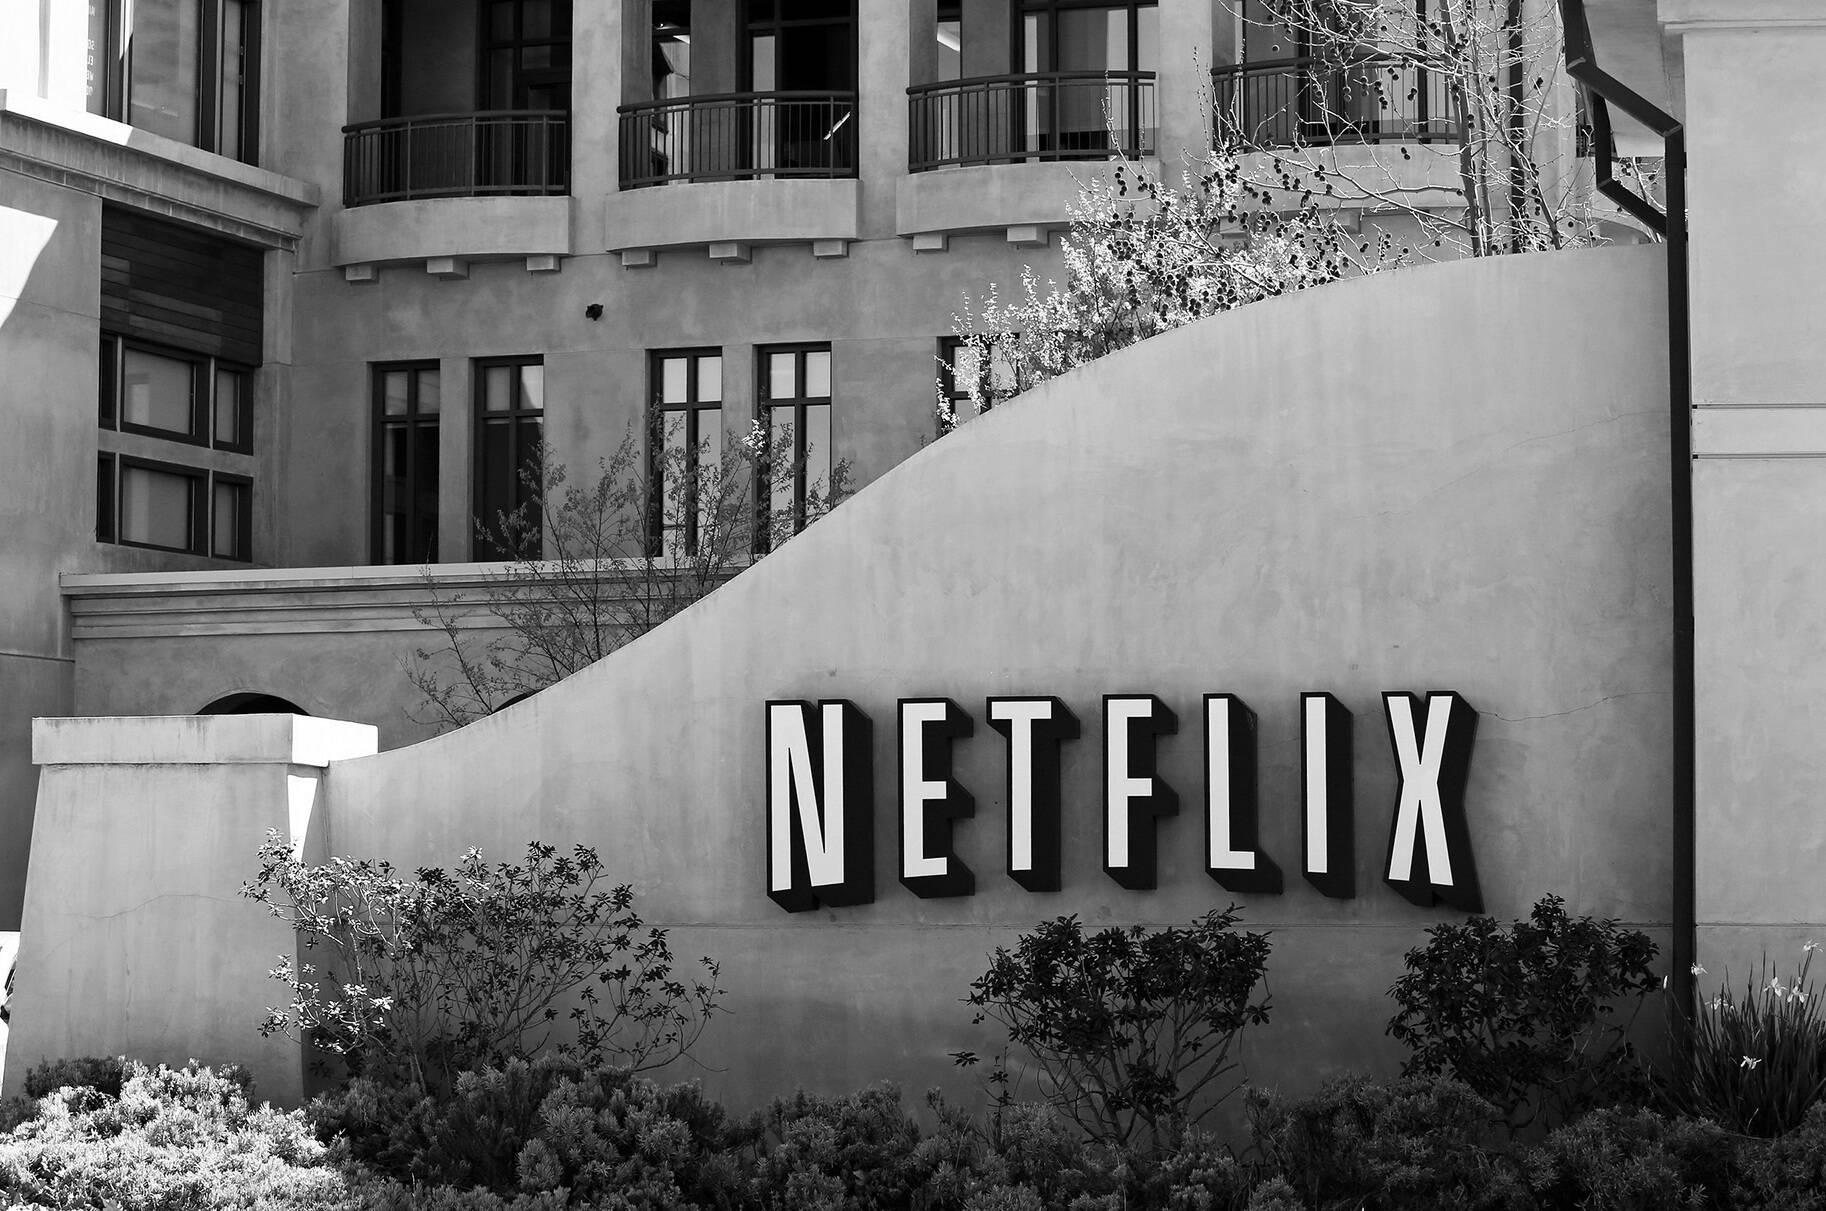 Confronted with rising competition and slowing subscriber growth, Netflix has invested heavily in foreign-language programming to cater to an increasingly global audience spanning 222 million subscribers. Dreamstime | TNS